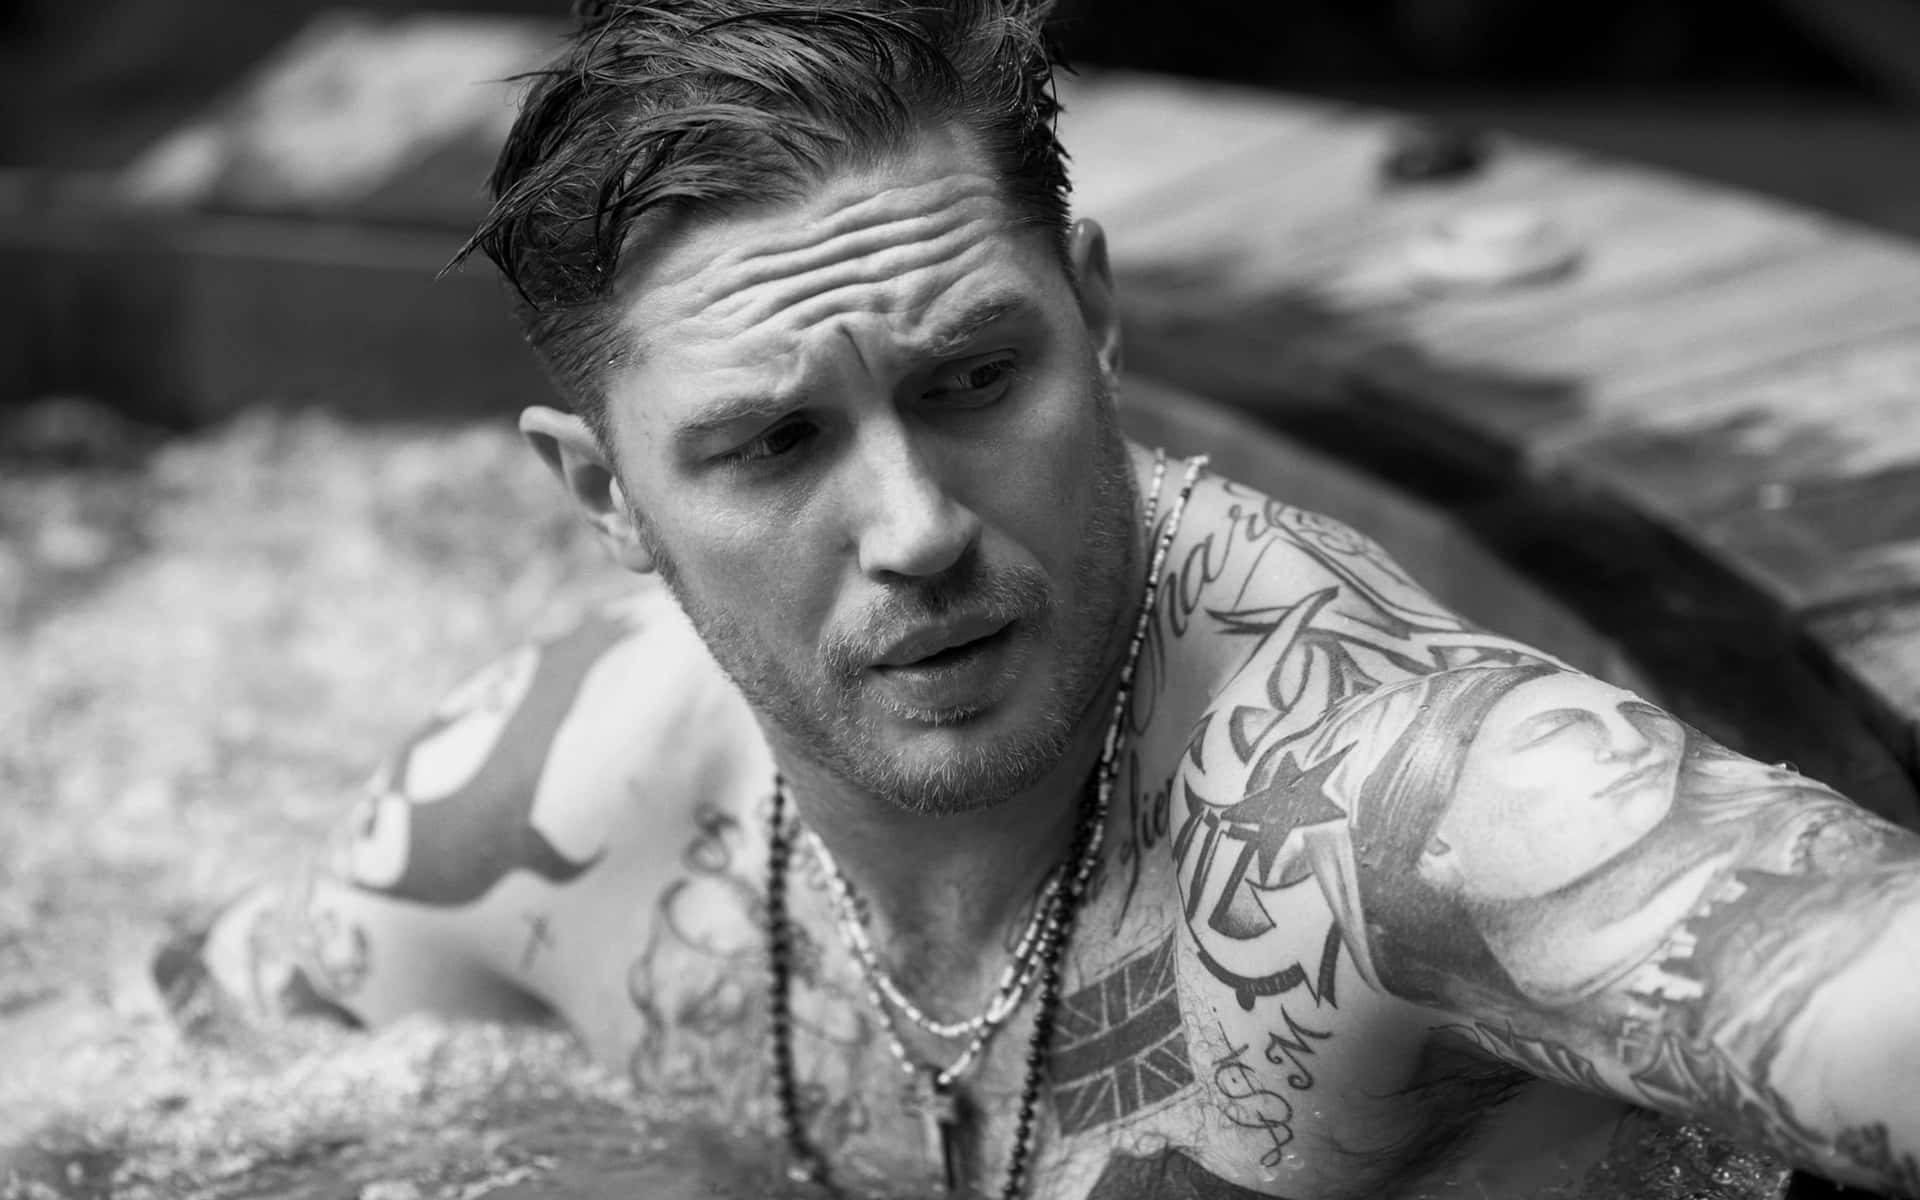 A Man With Tattoos In A Hot Tub